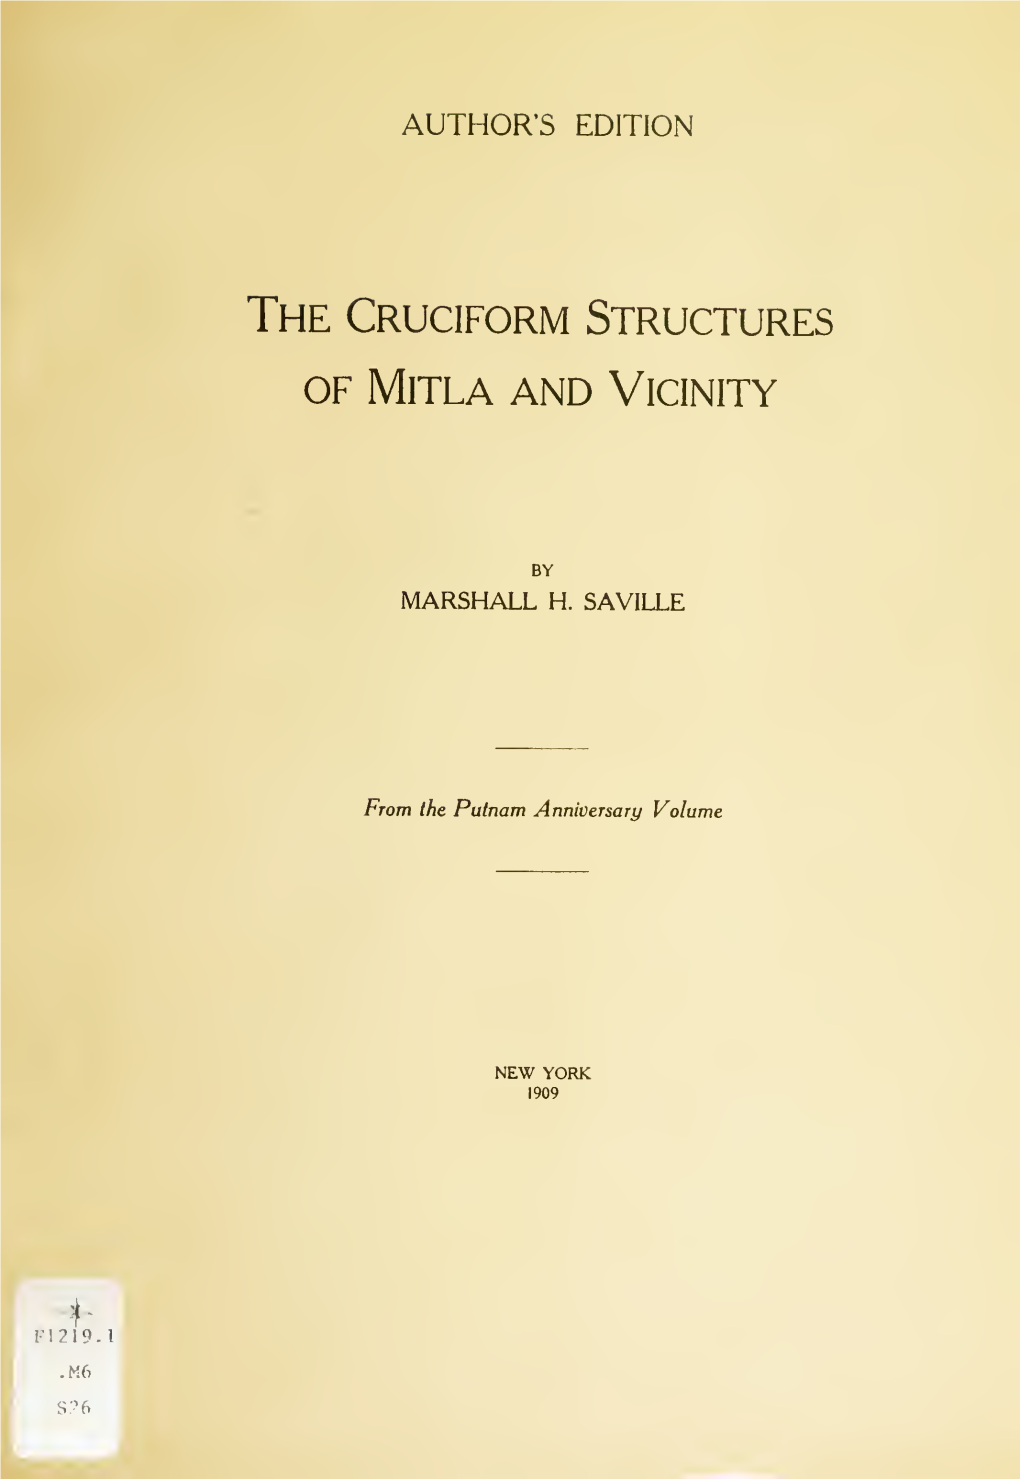 The Cruciform Structures of Mitla and Vicinity